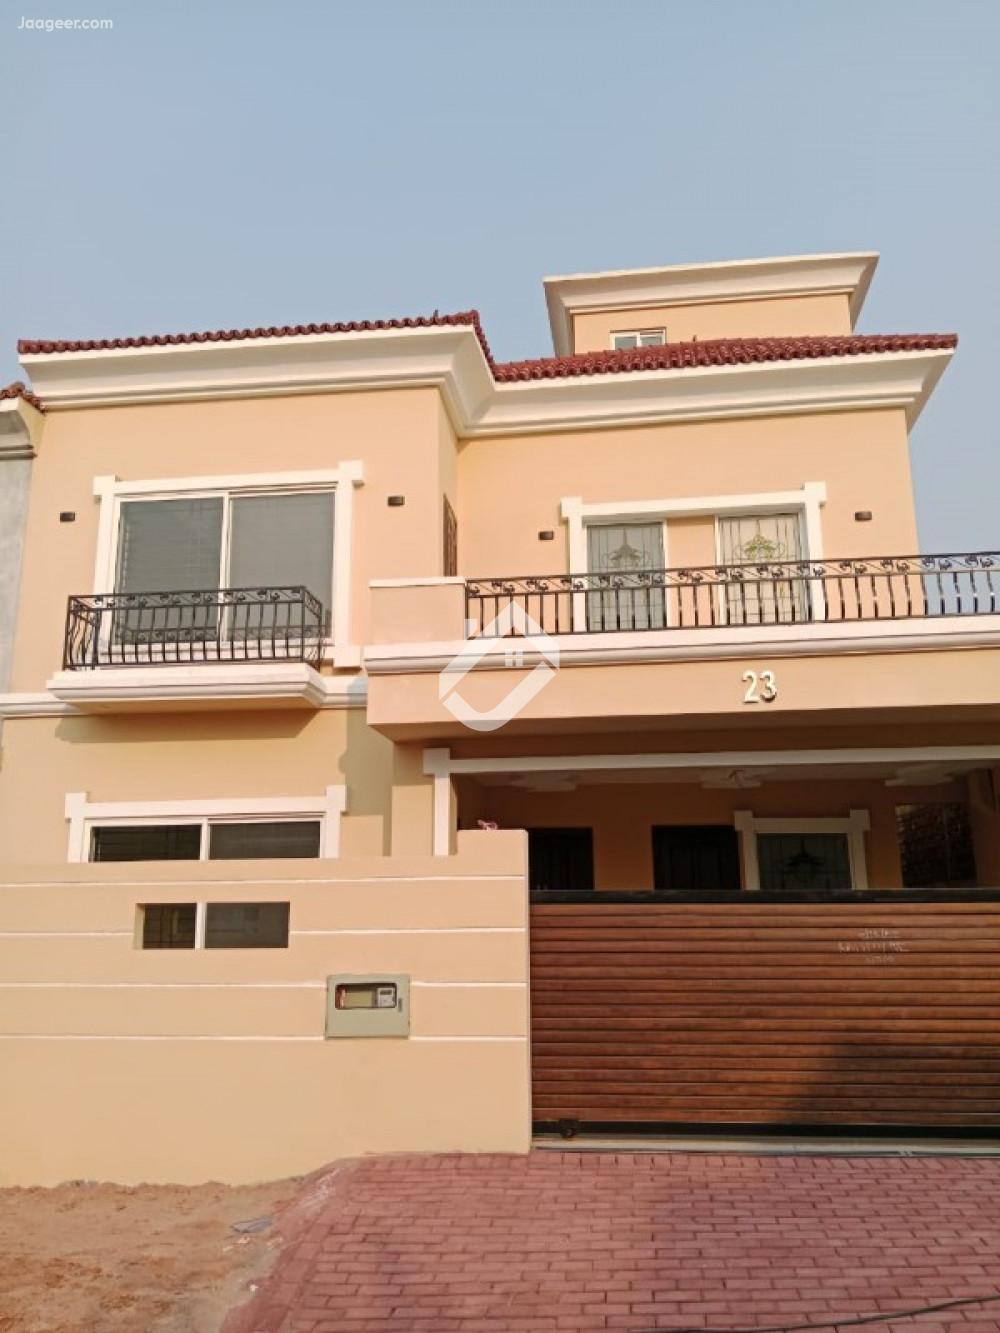 Main image 10 Marla Double Storey House For Sale In Bahria Enclave Block-M Bahria Enclave, Islamabad